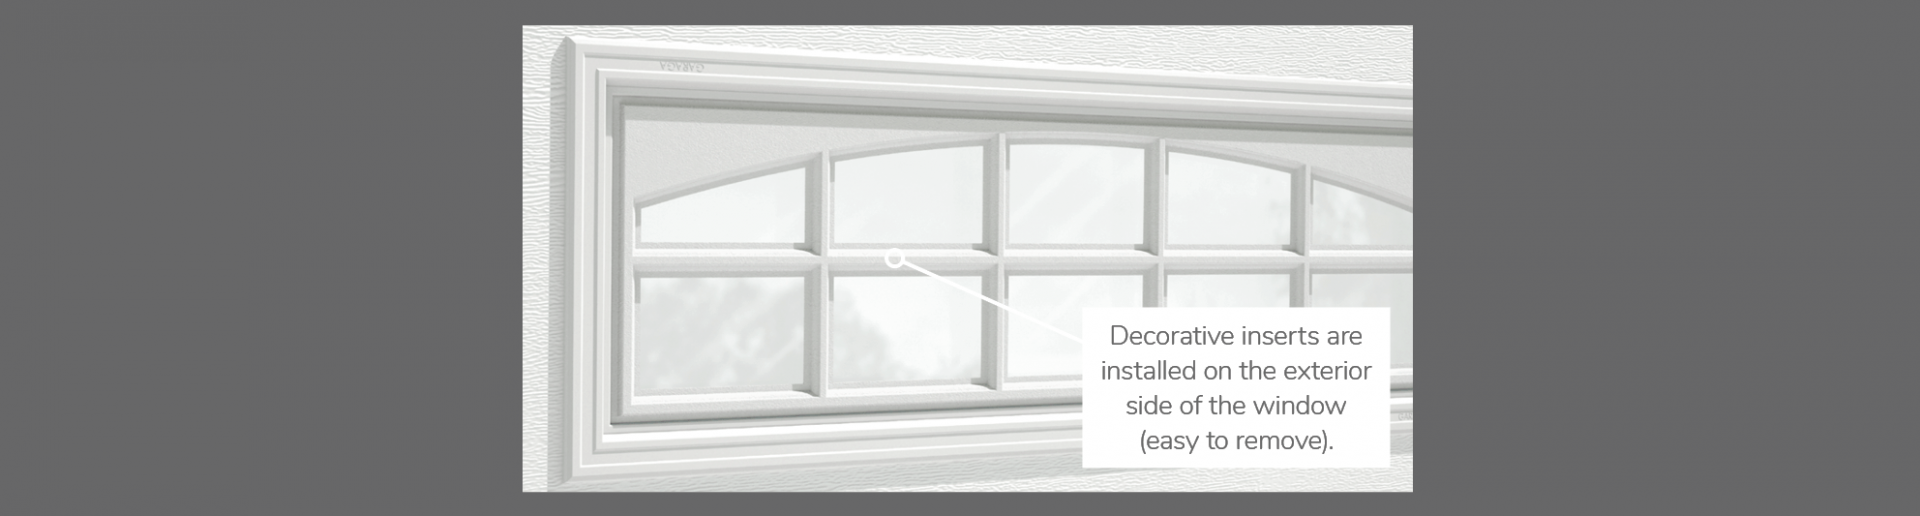 Cascade Decorative Insert, 21" x 13" and 40" x 13", available for door R-16, R-12